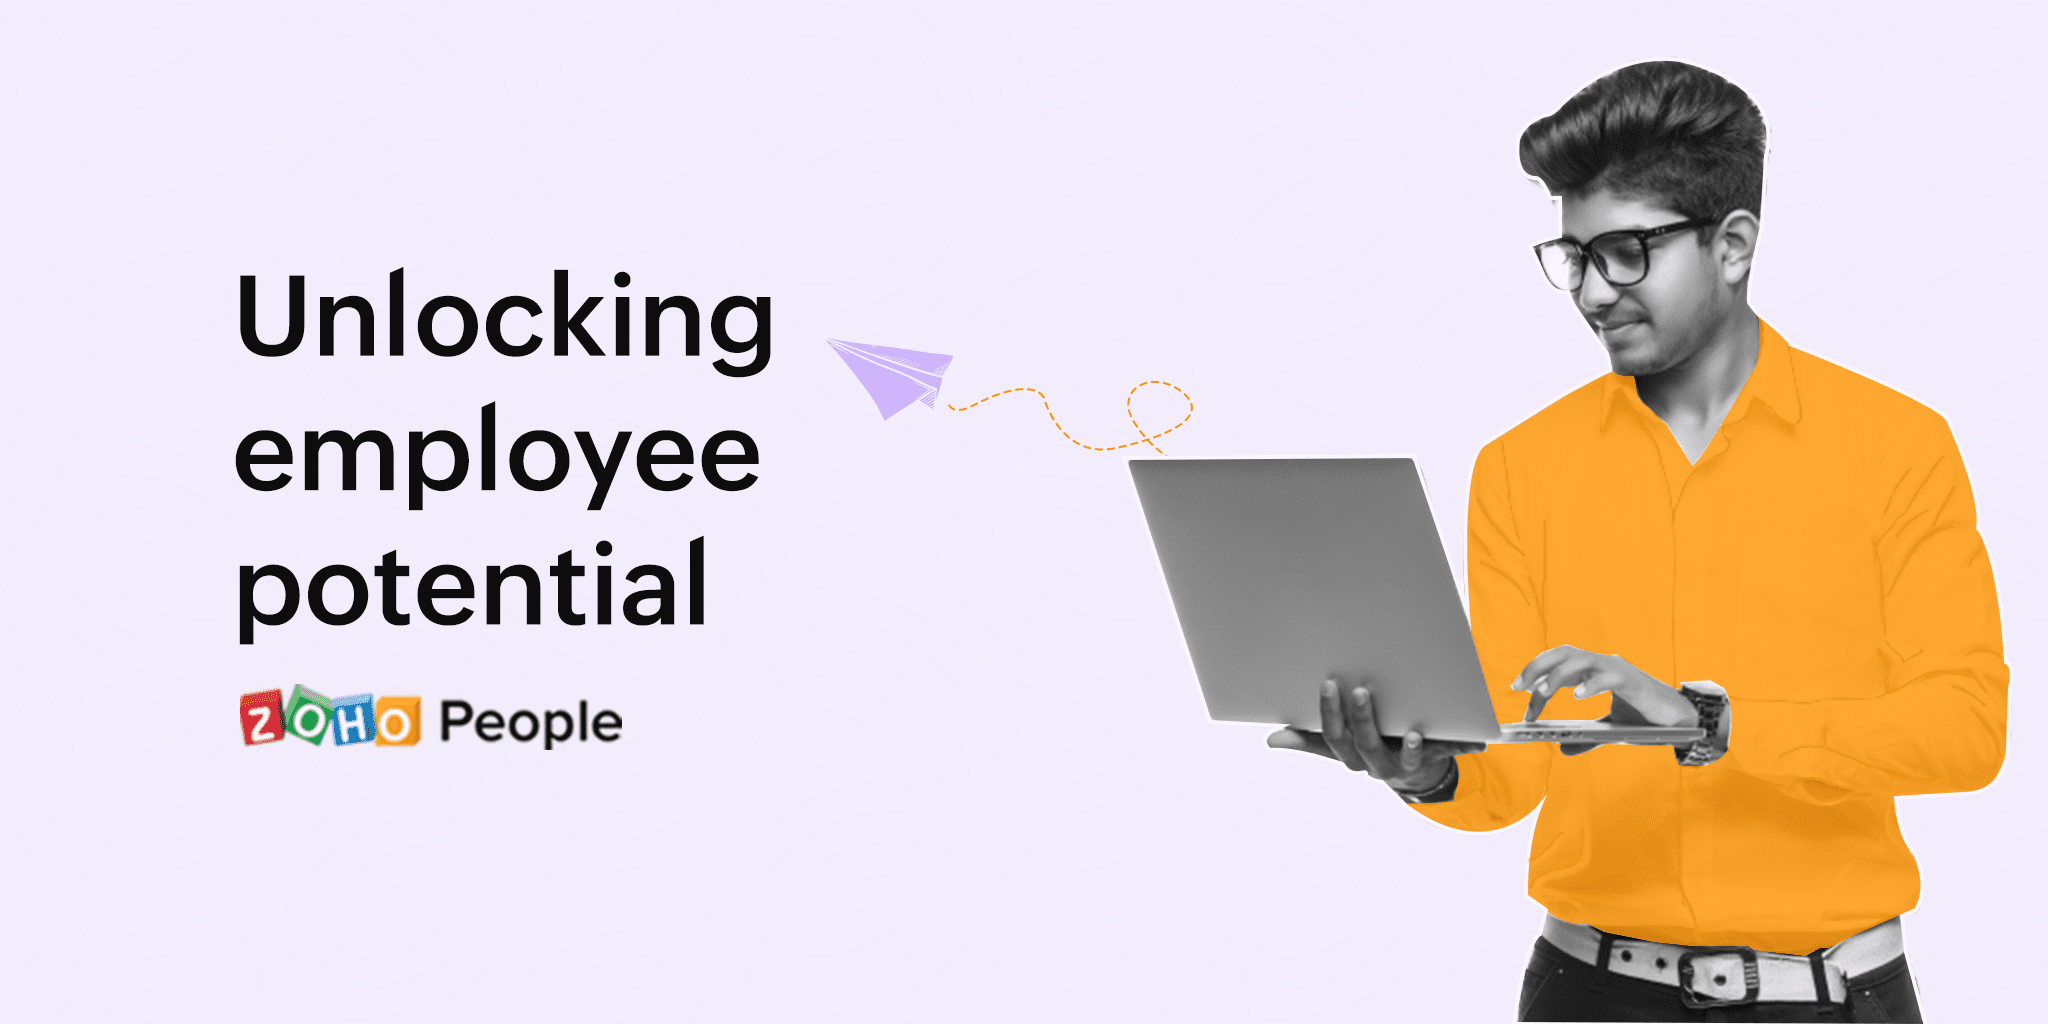 5 useful tips for unlocking employee potential